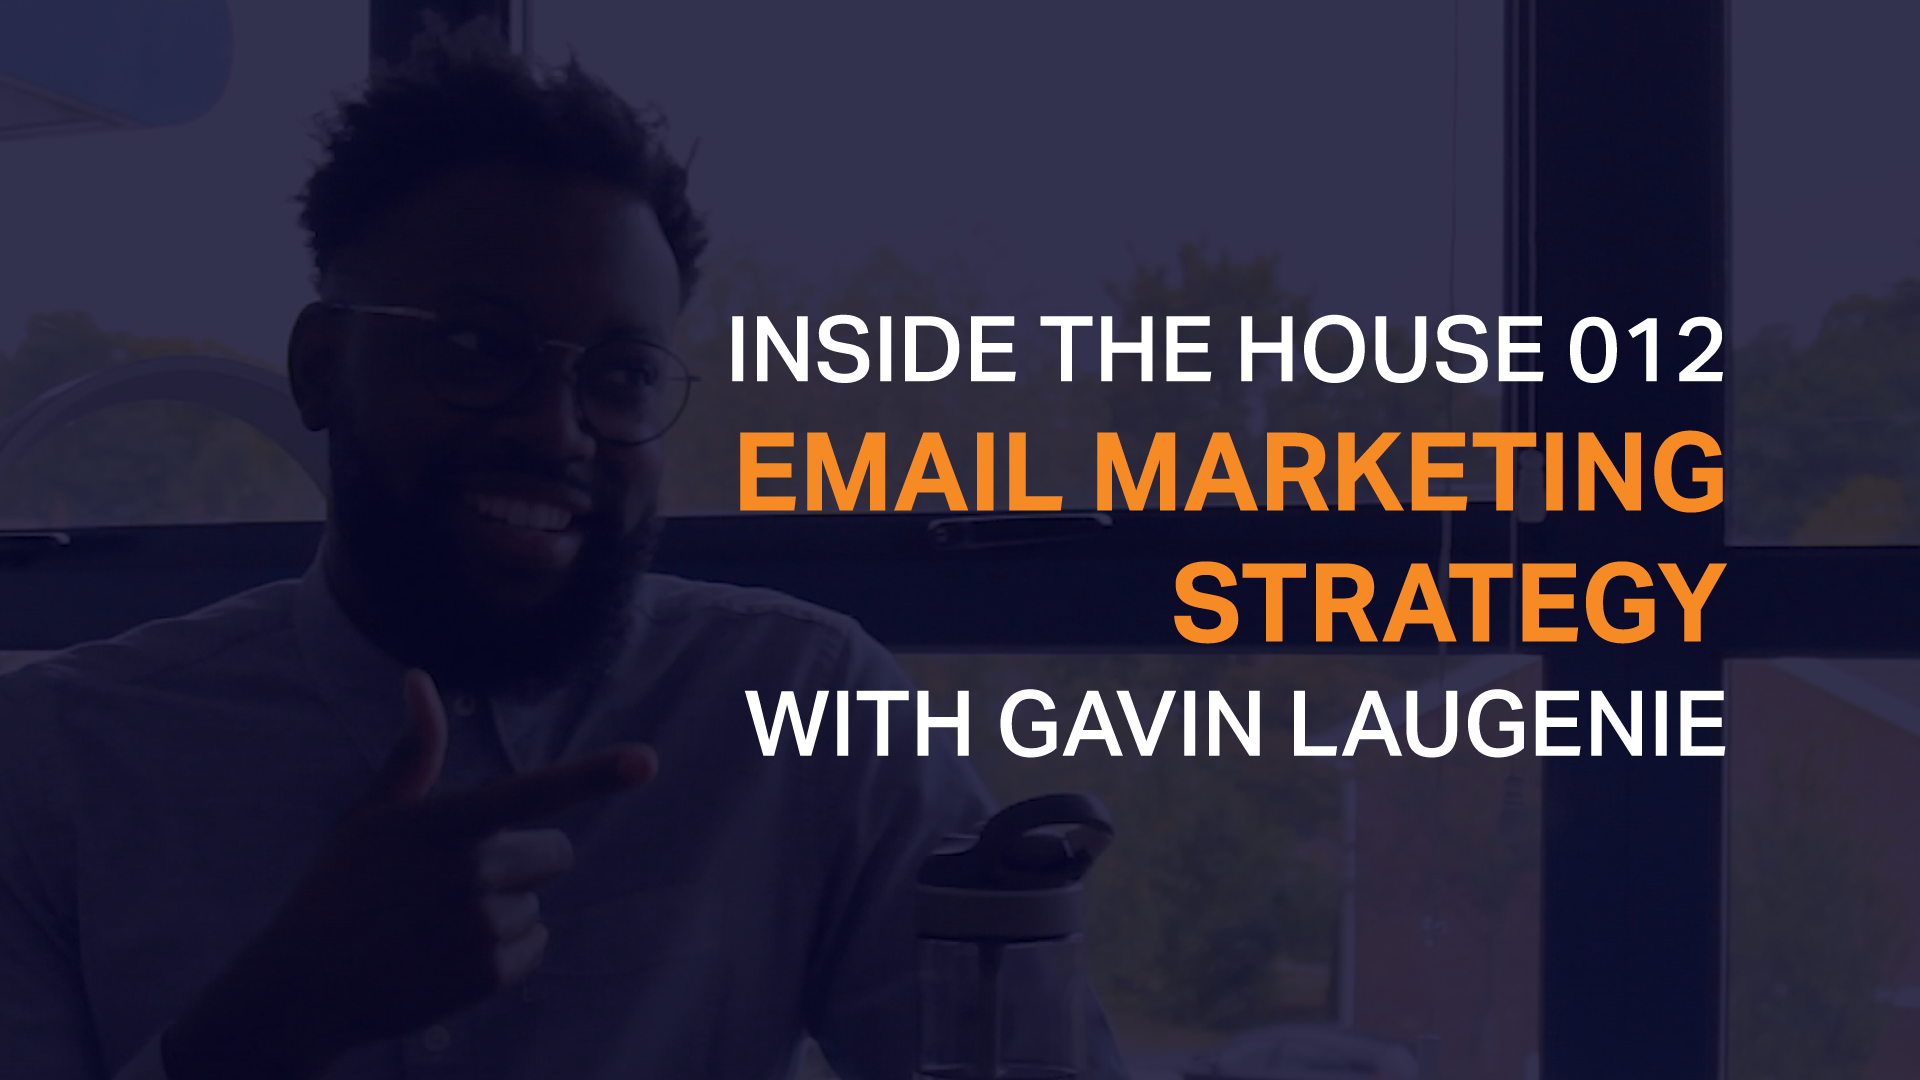 Inside the House 012 Email Marketing Strategy